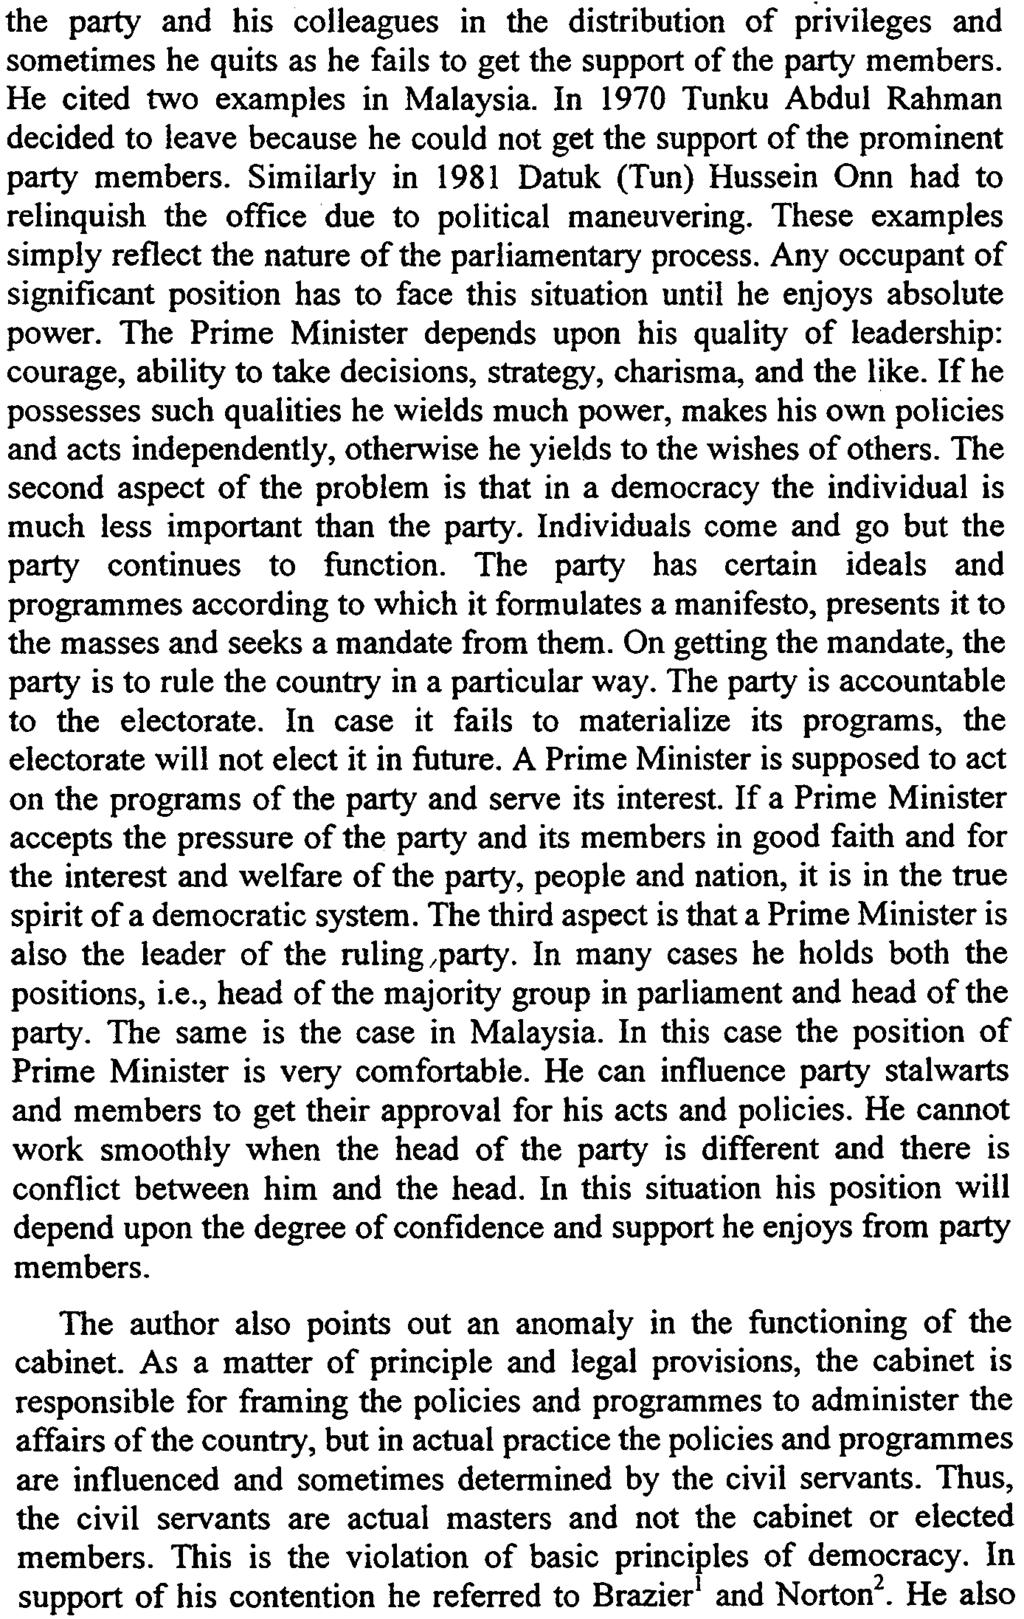 BOOK REVIEW [249] the party and his colleagues in the distribution of privileges and sometimes he quits as he fails to get the support of the party members. He cited two examples in Malaysia.